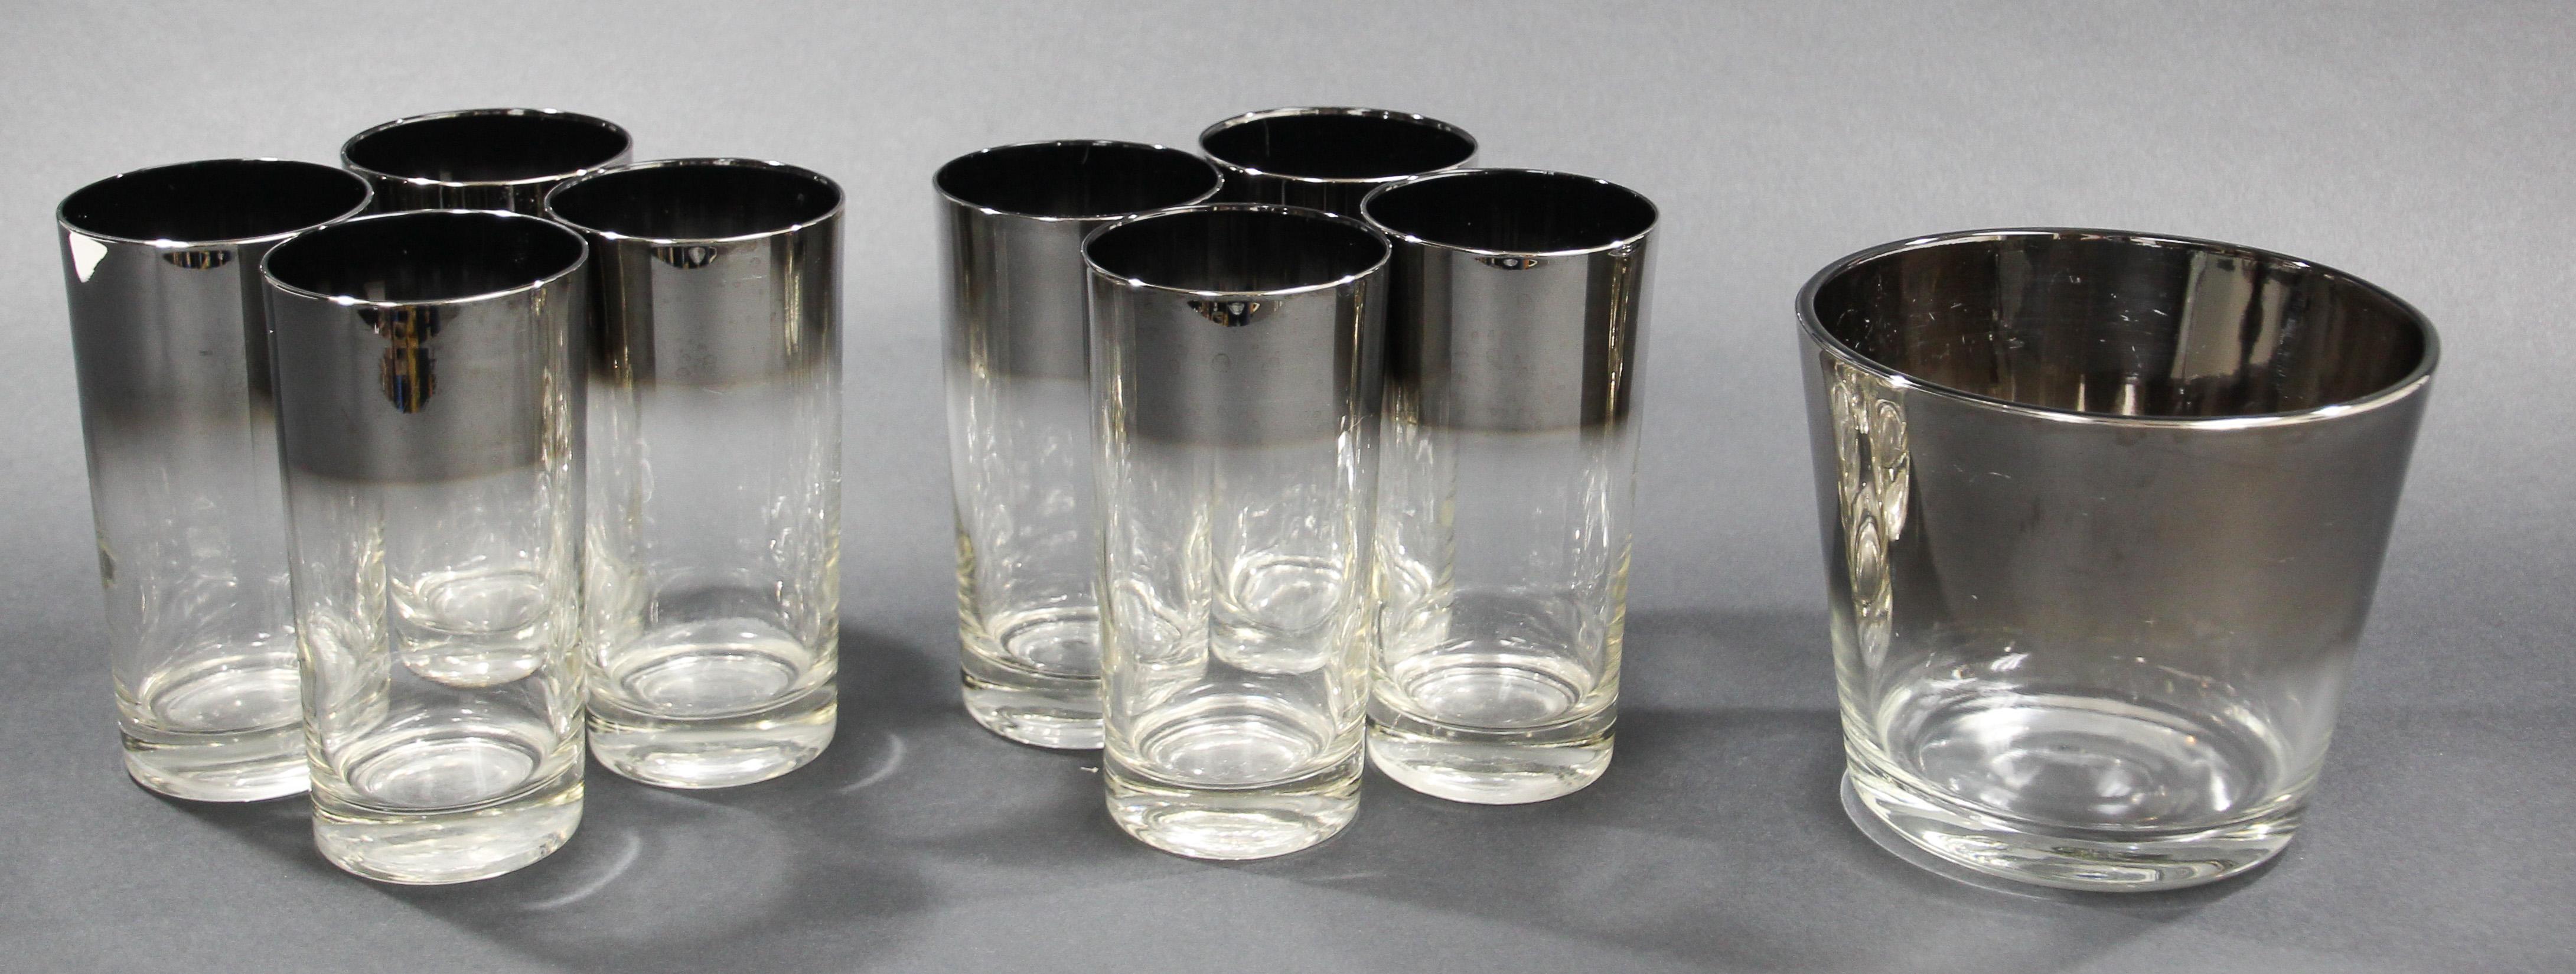 Dorothy Thorpe Mid-Century Silver Fade Cocktail Barware Glasses and Ice Bucket For Sale 2